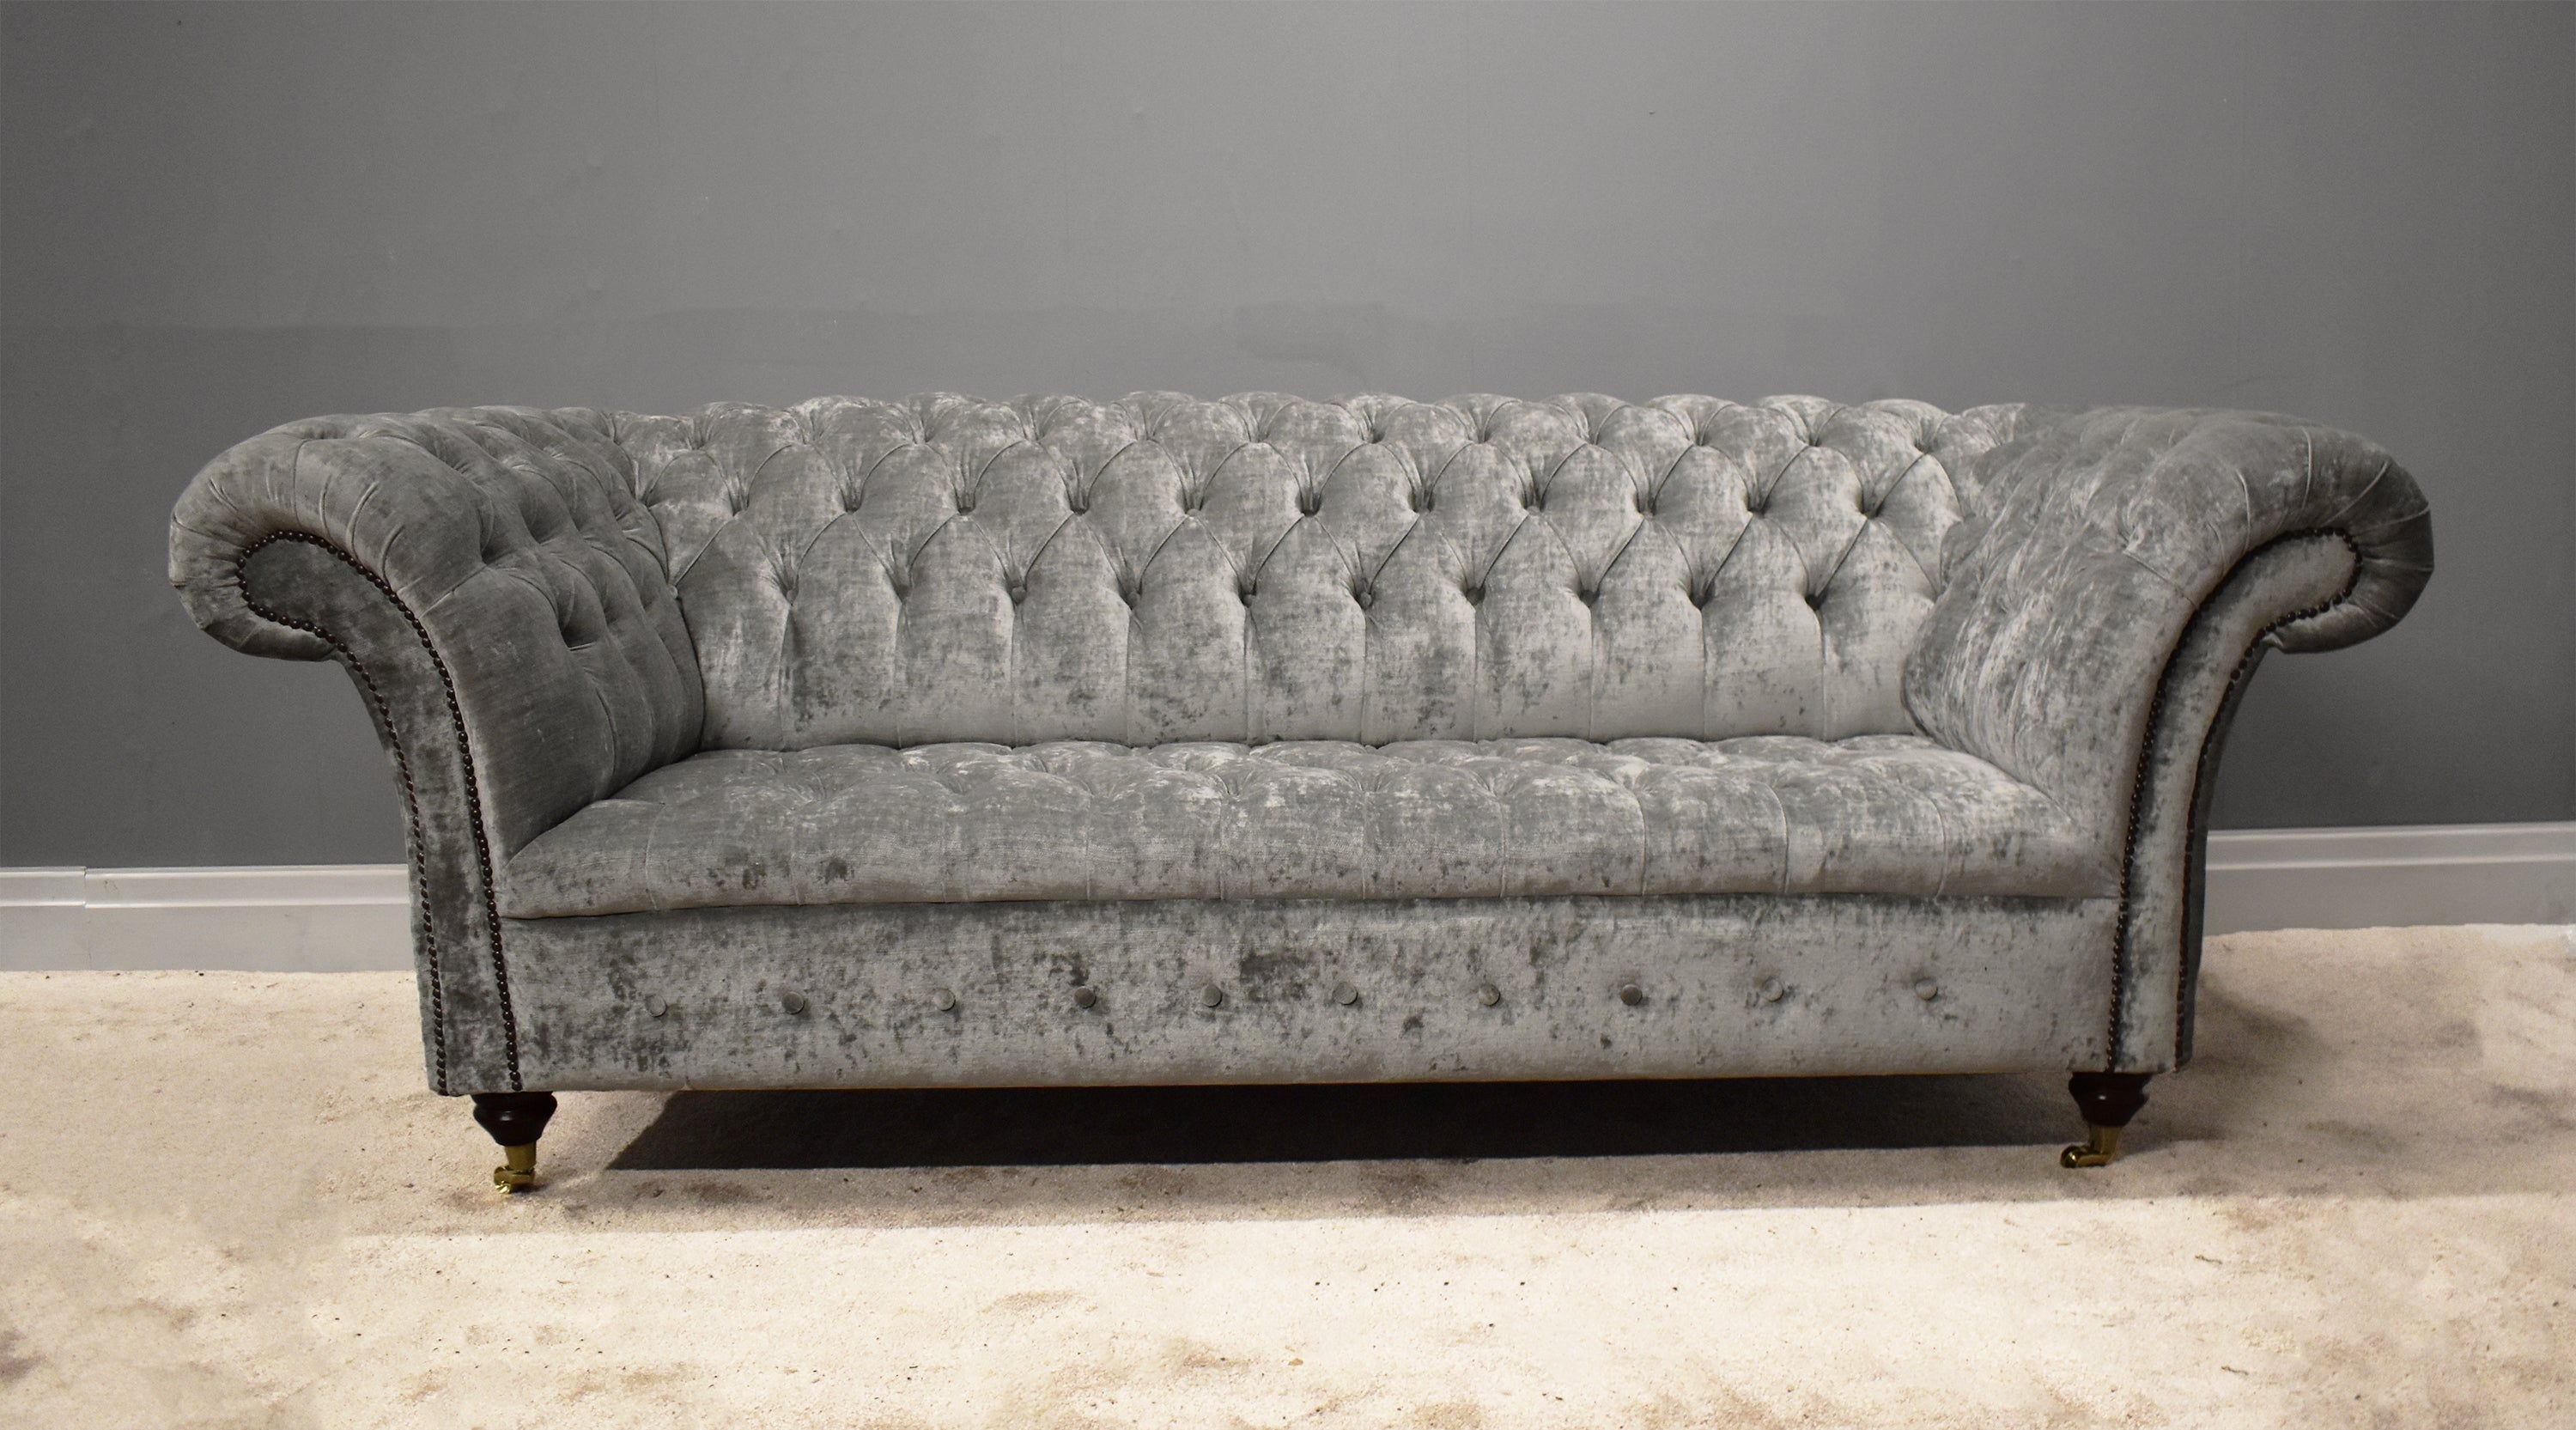 The Cliveden Chesterfield Sofa - Great British Chesterfields